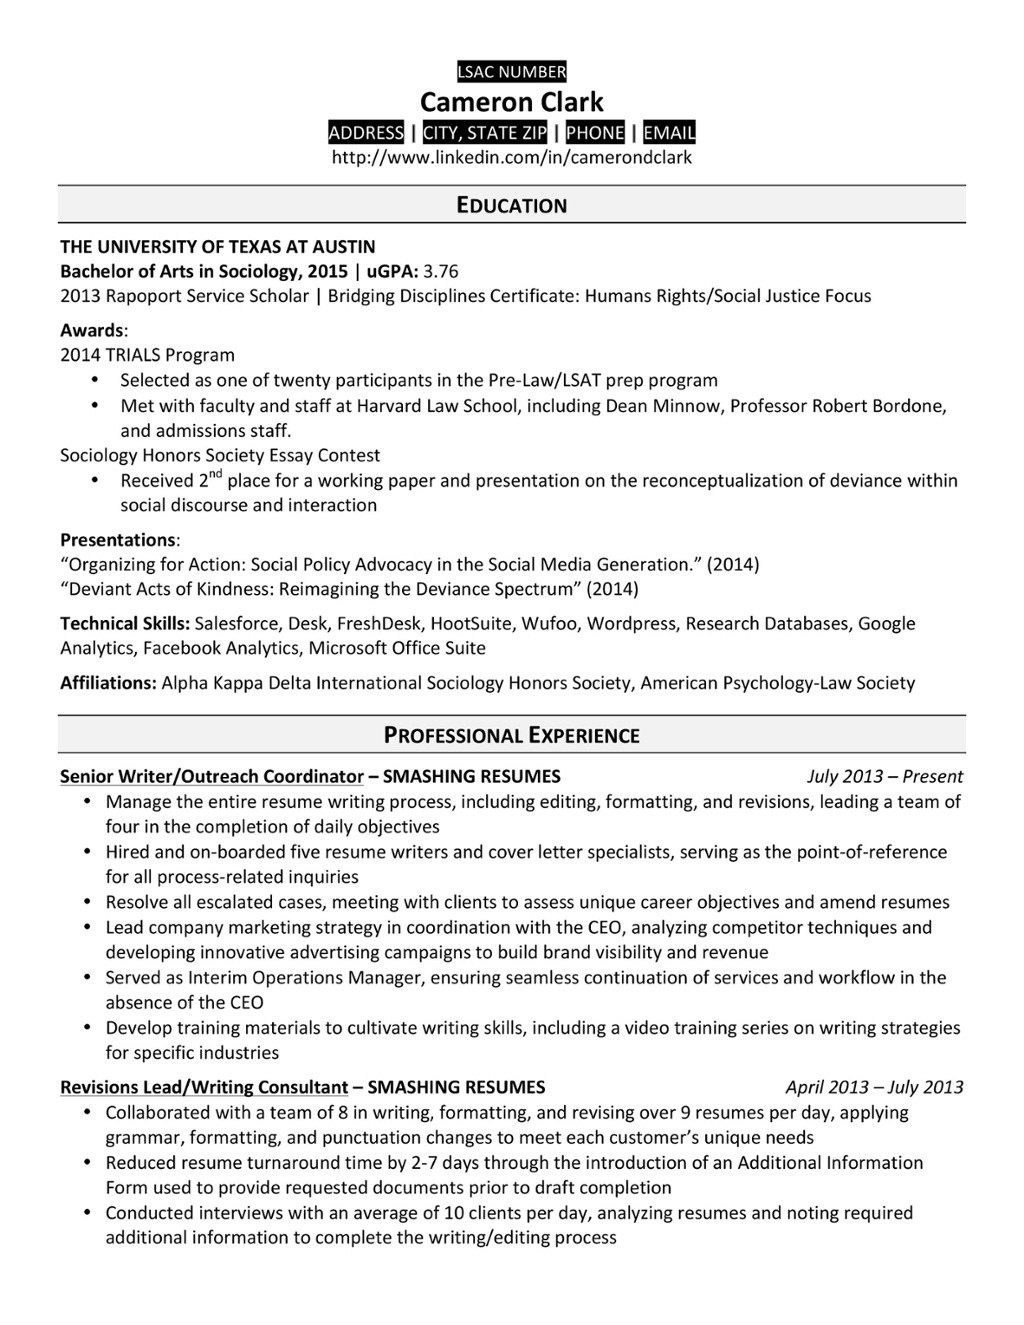 Sample Of Harvard Law School Resume 5 Law School Resume Templates: Prepping Your Resume for Law School …